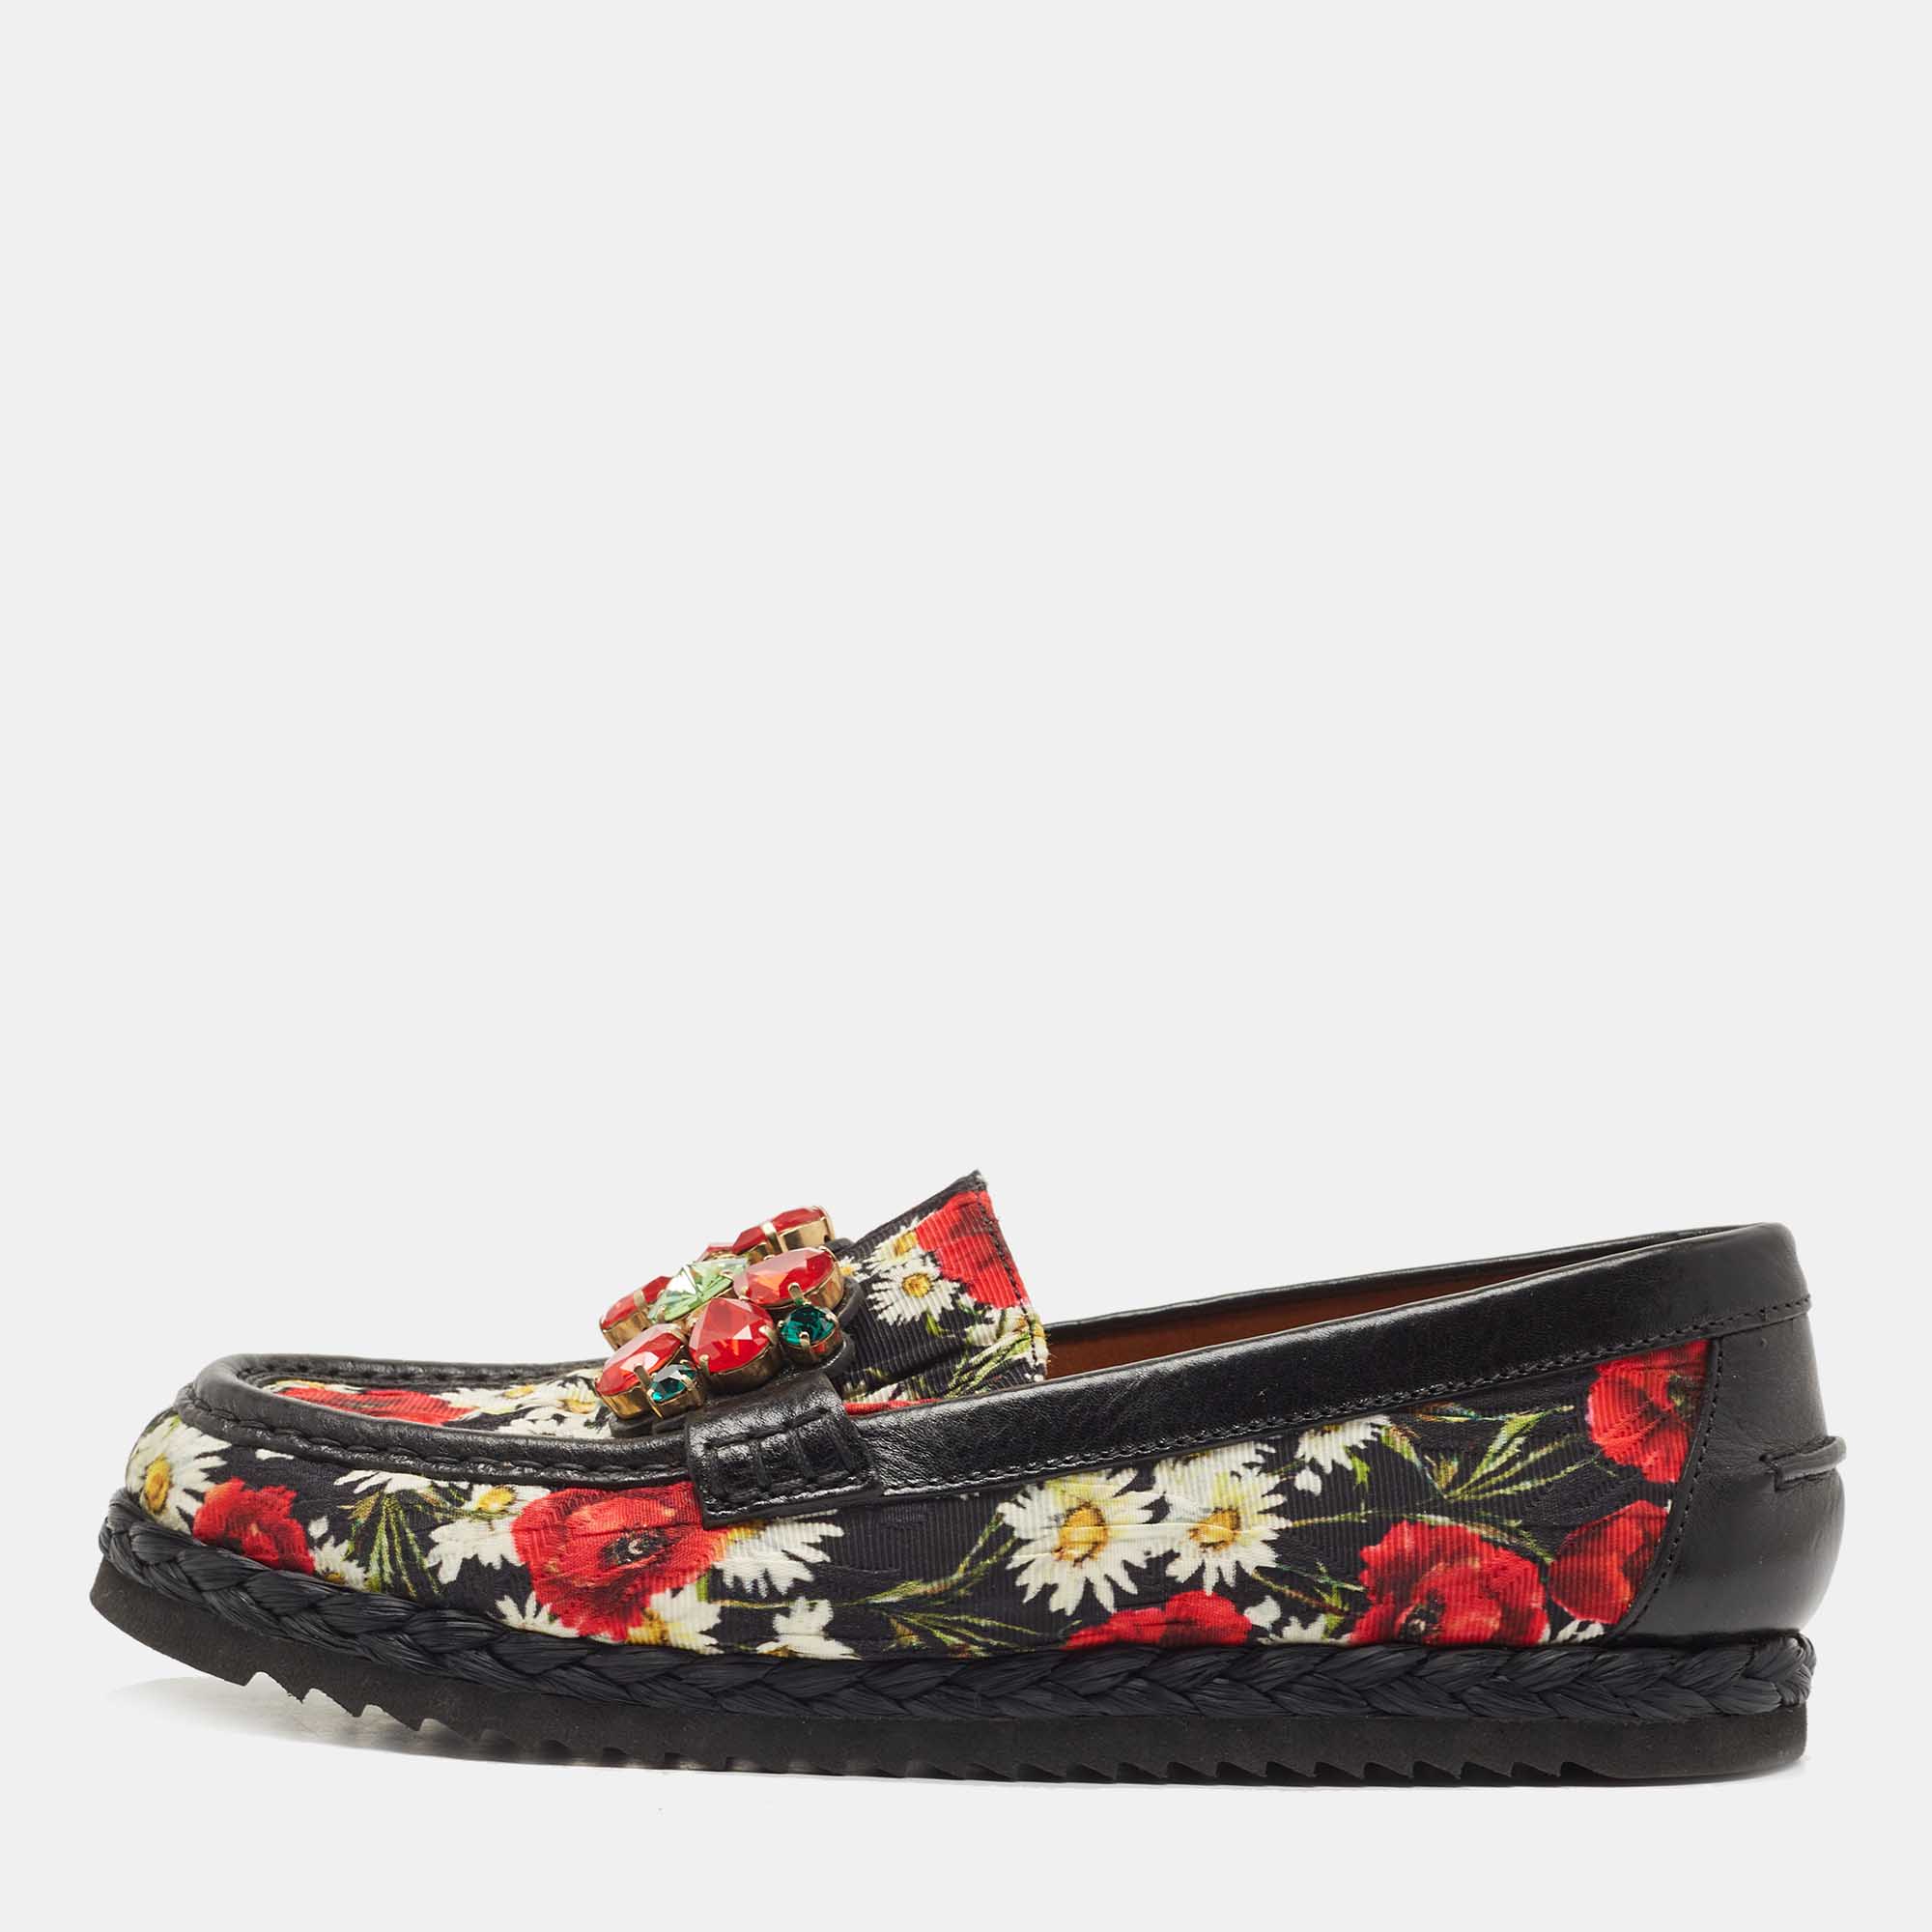 Dolce & Gabbana Multicolor Floral Fabric And Leather Crystal Embellished Loafers Size 39